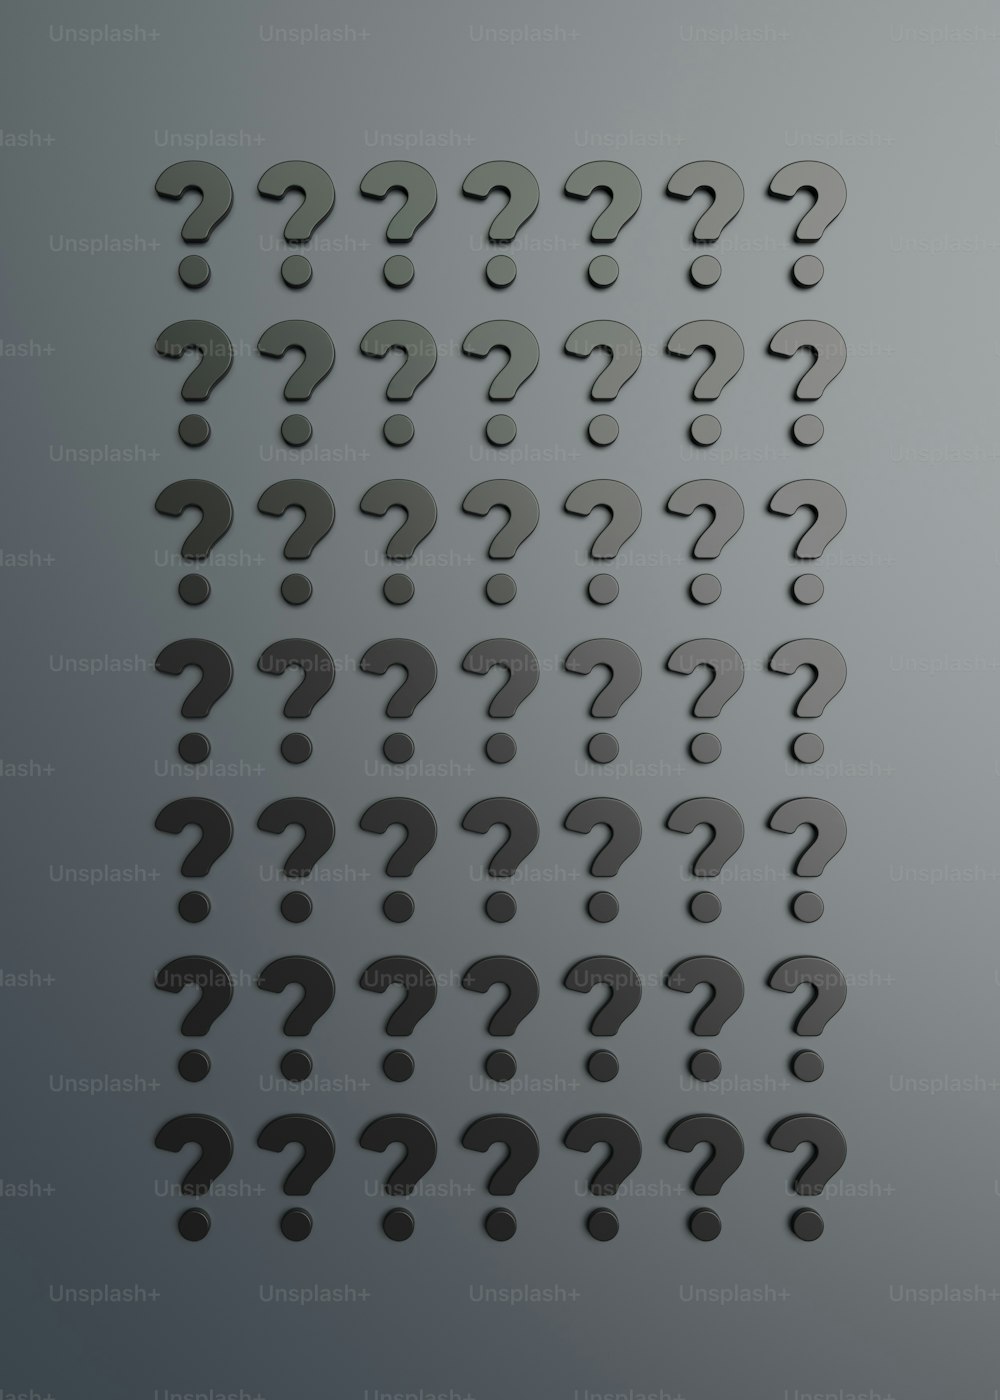 a number of question marks on a gray background